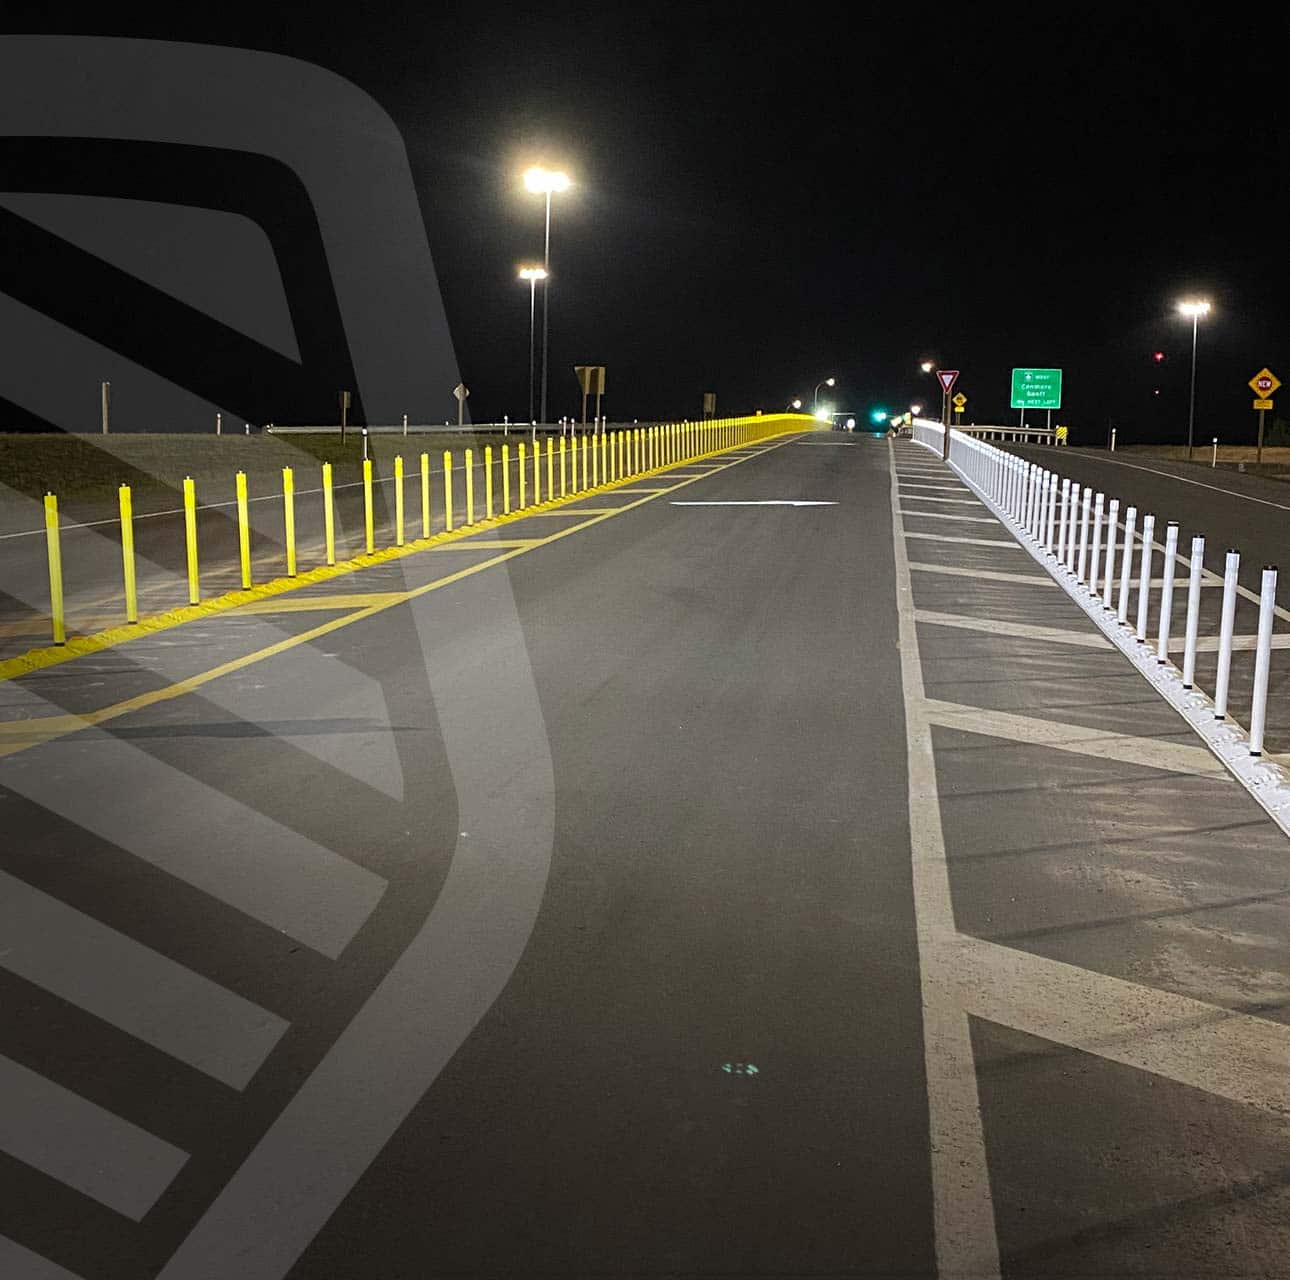 Barricades and signs, traffic control companies, road flagging companies, portable electronic traffic signs, alberta traffic supply, BC traffic supply, manitoba traffic supply, saskatchewan traffic supply